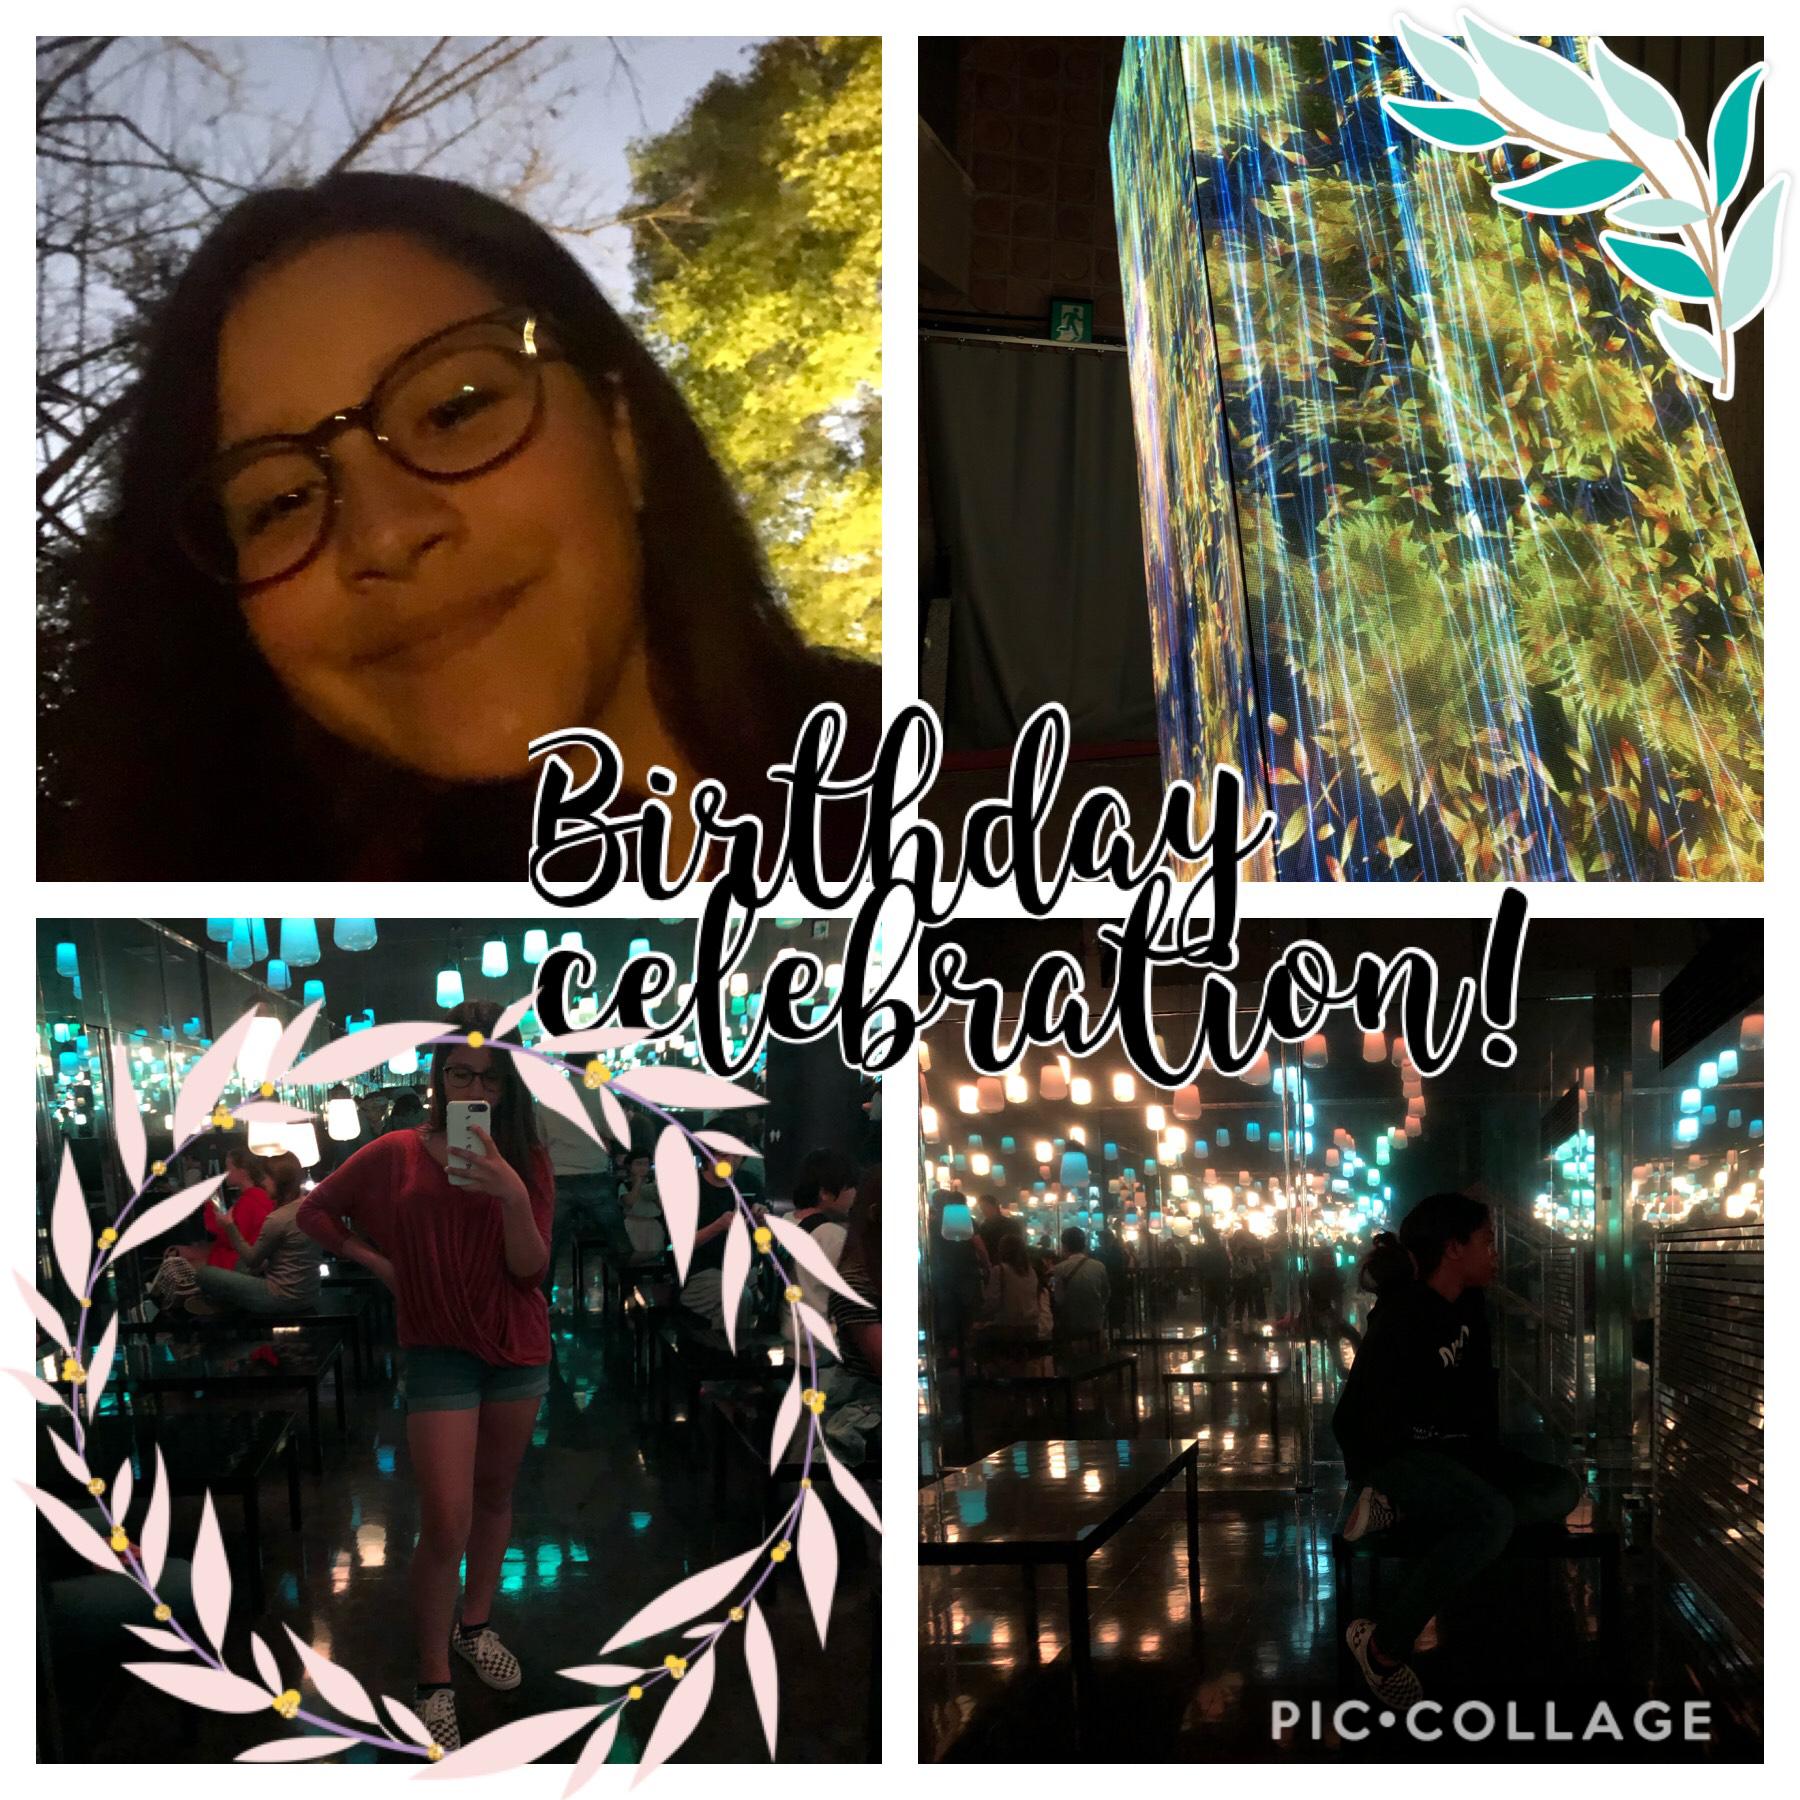 Celebrated my birthday today with my friends and had a great time at a forest with beautiful lights!